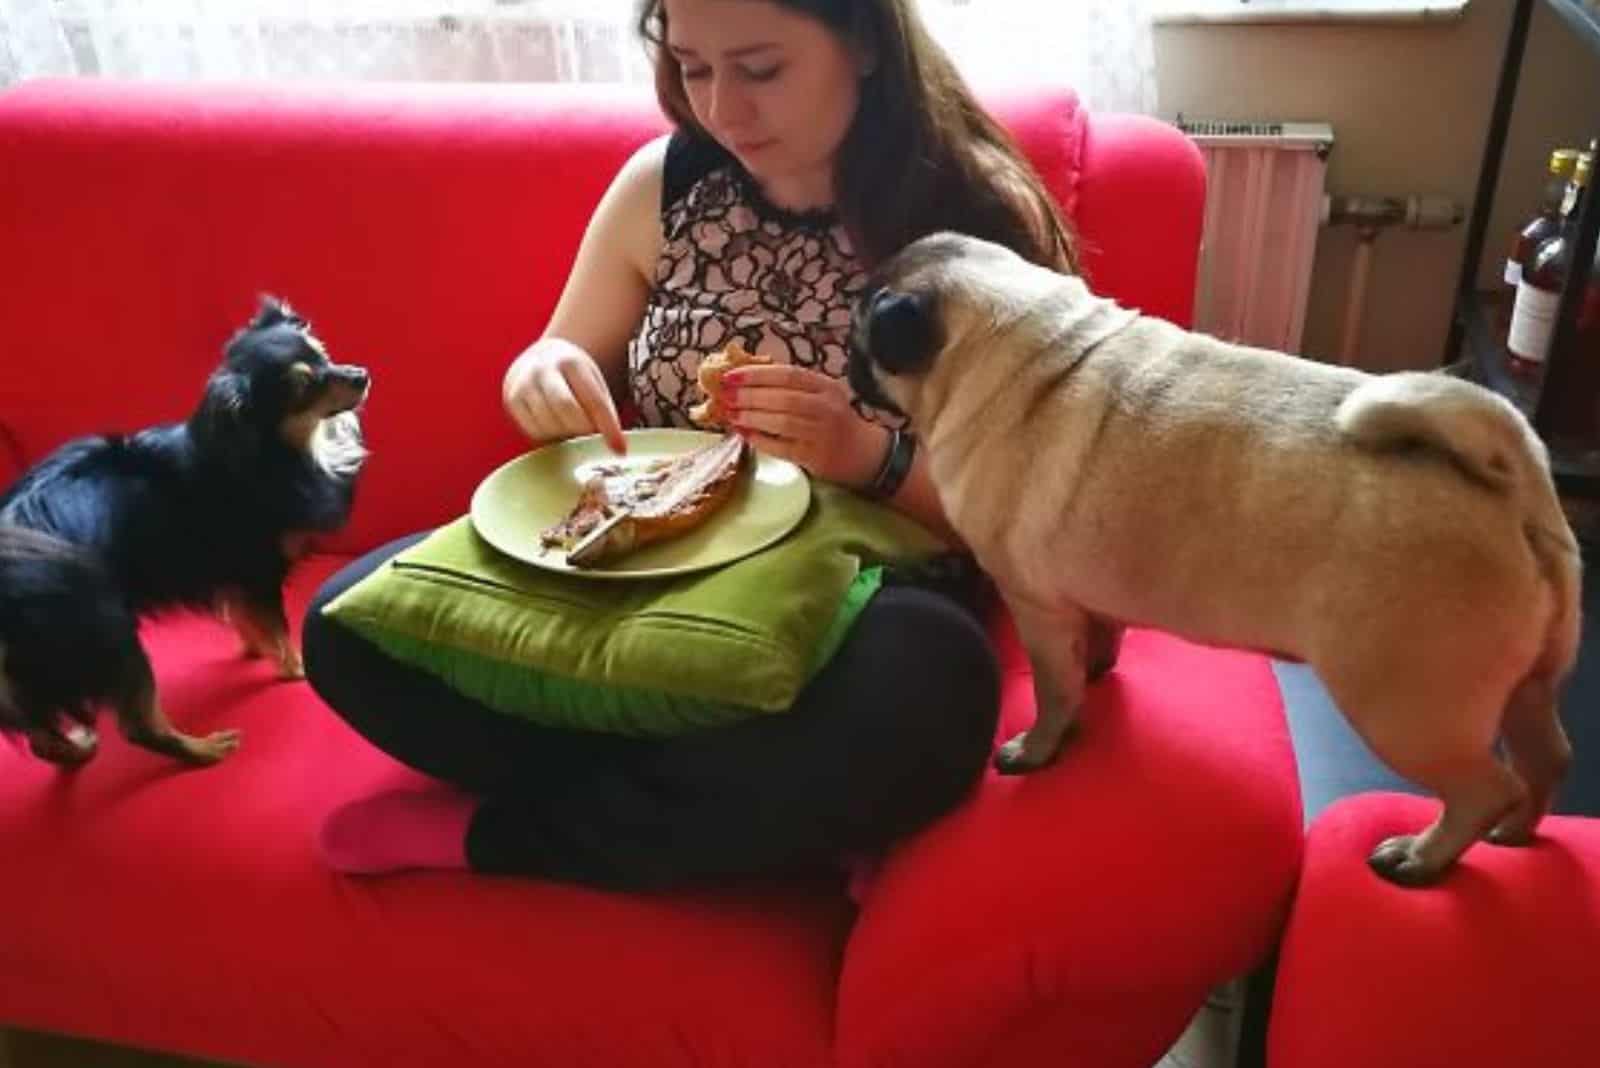 two dogs standing on the couch and looking at their owner  eating food from a plate